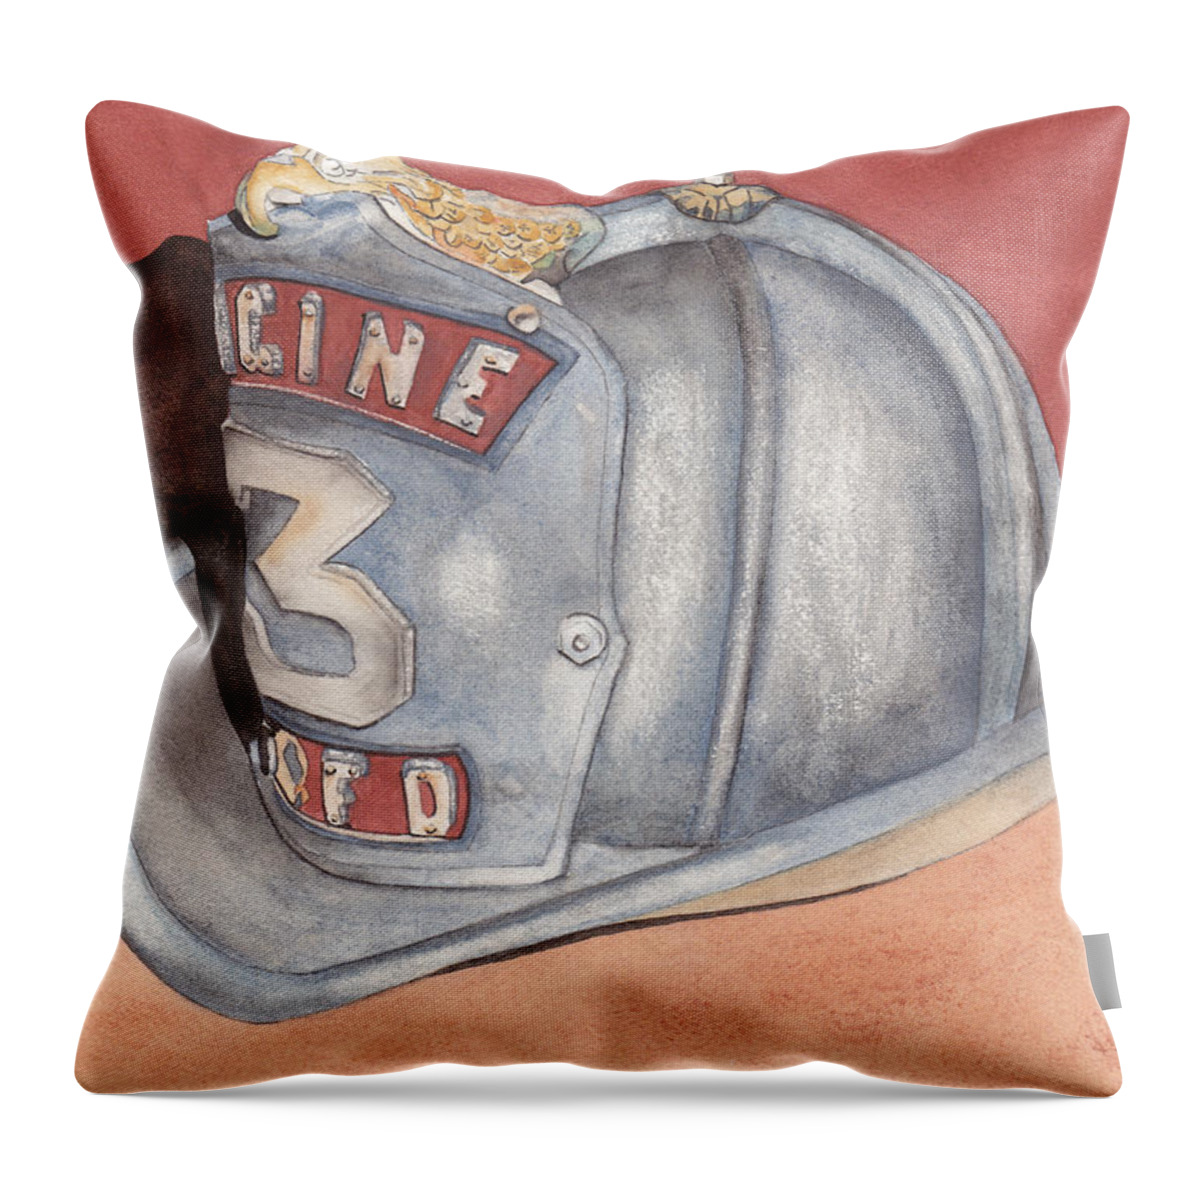 Fire Throw Pillow featuring the painting Rondo's Fire Helmet by Ken Powers